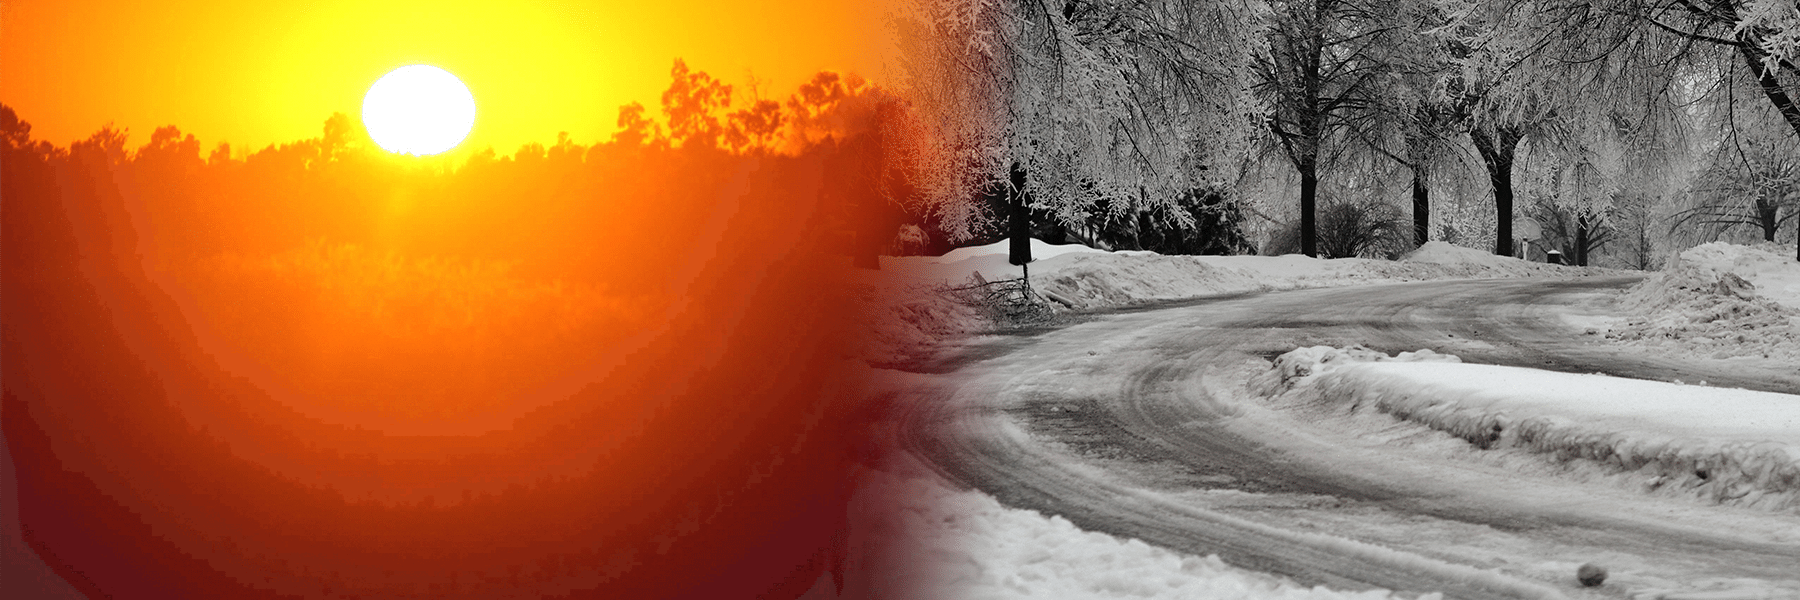 Half of the image is the sun radiating over a landscape, and the other half is a snowy/icy street and trees